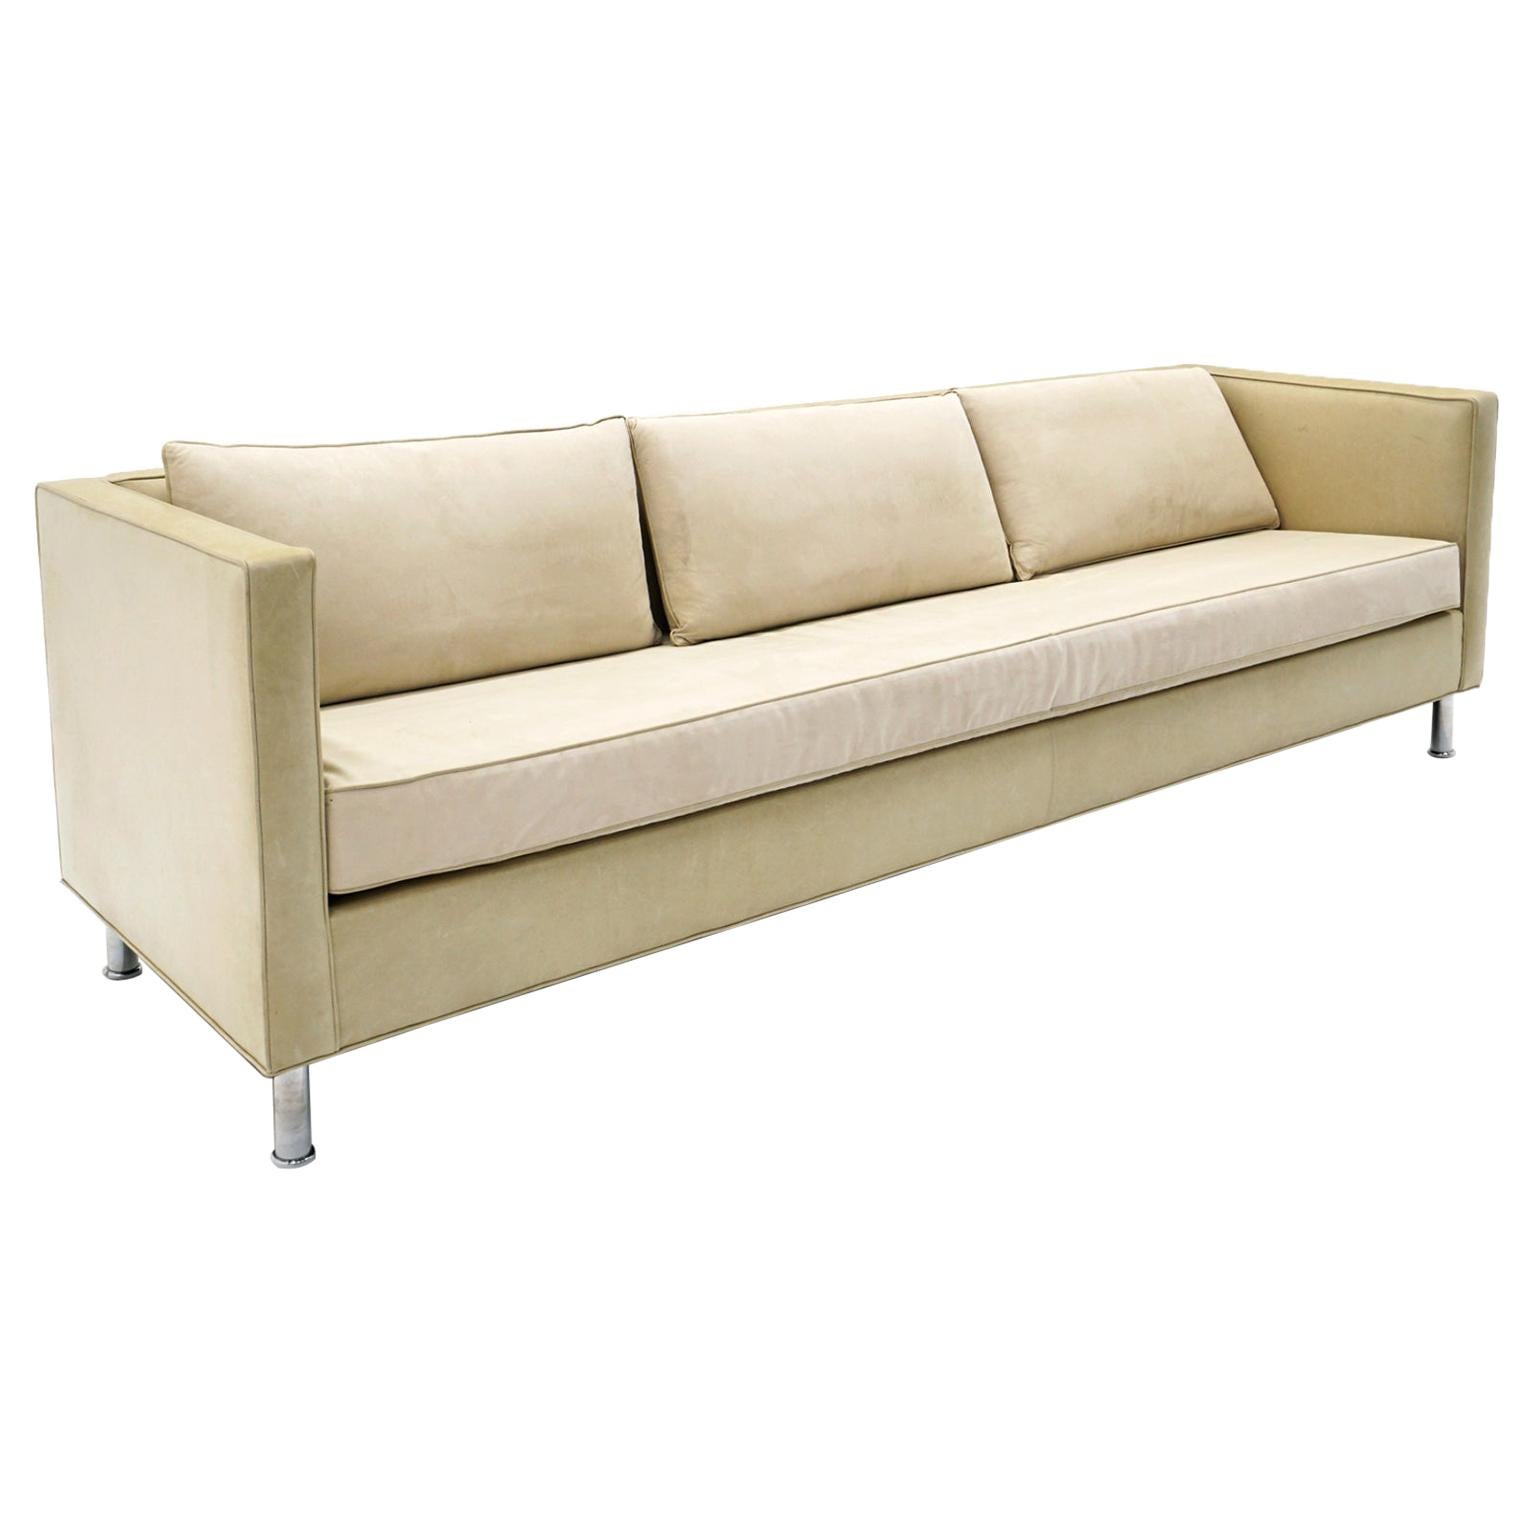 Sofa in Off White /Beige Leather with Mohair Cushions by Niedermaier, Chicago